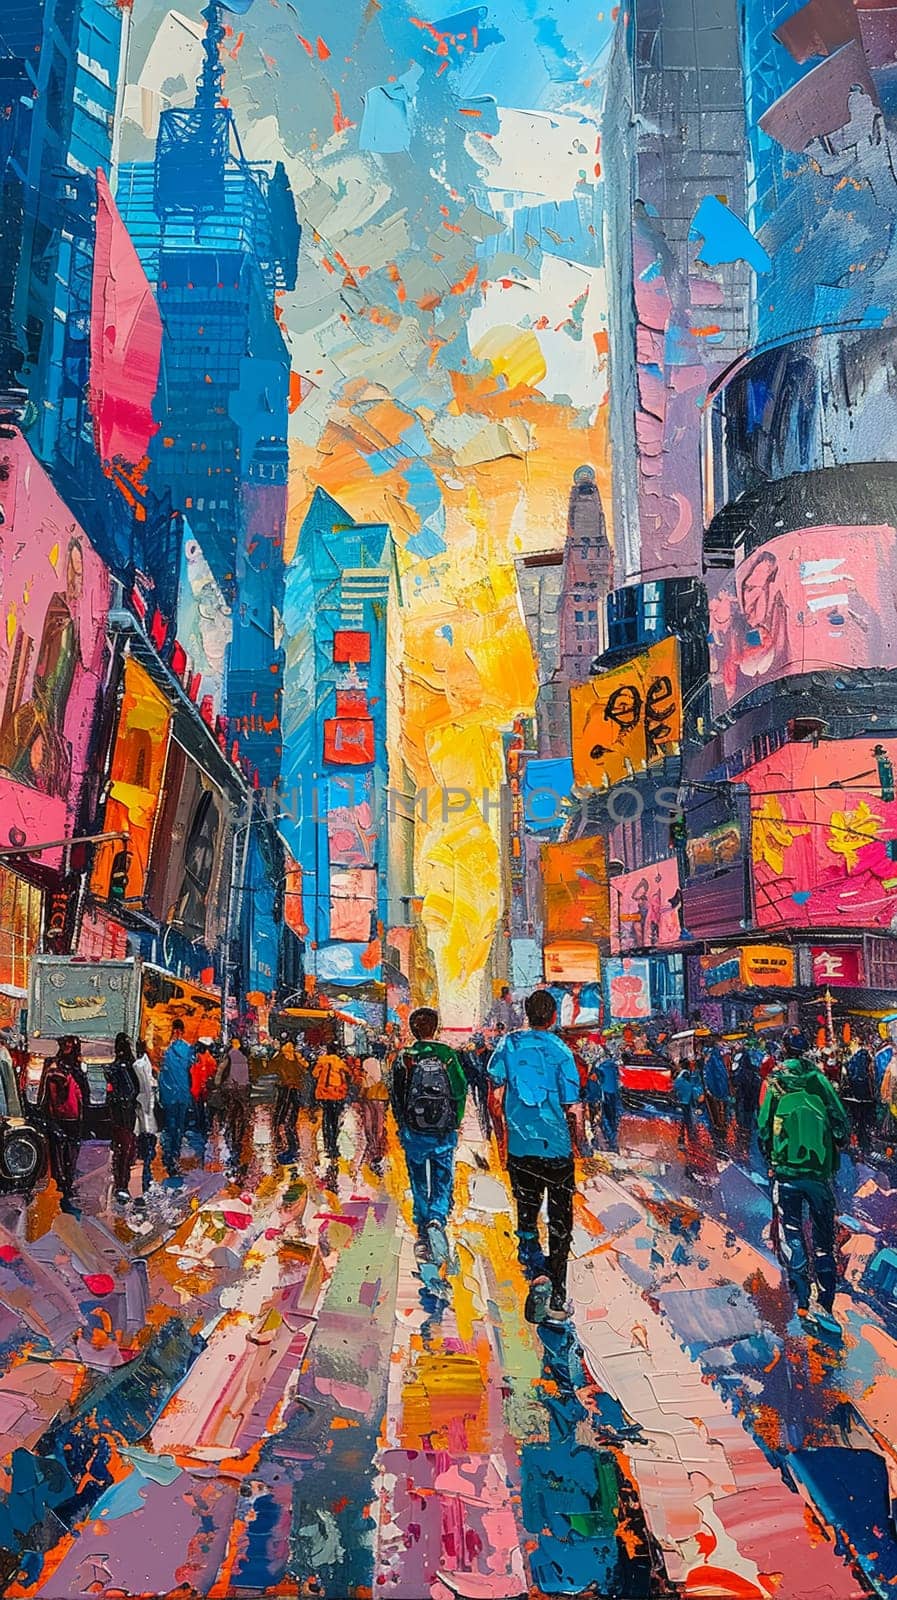 Bustling district street captured with energetic, abstract expressionist paint strokes.